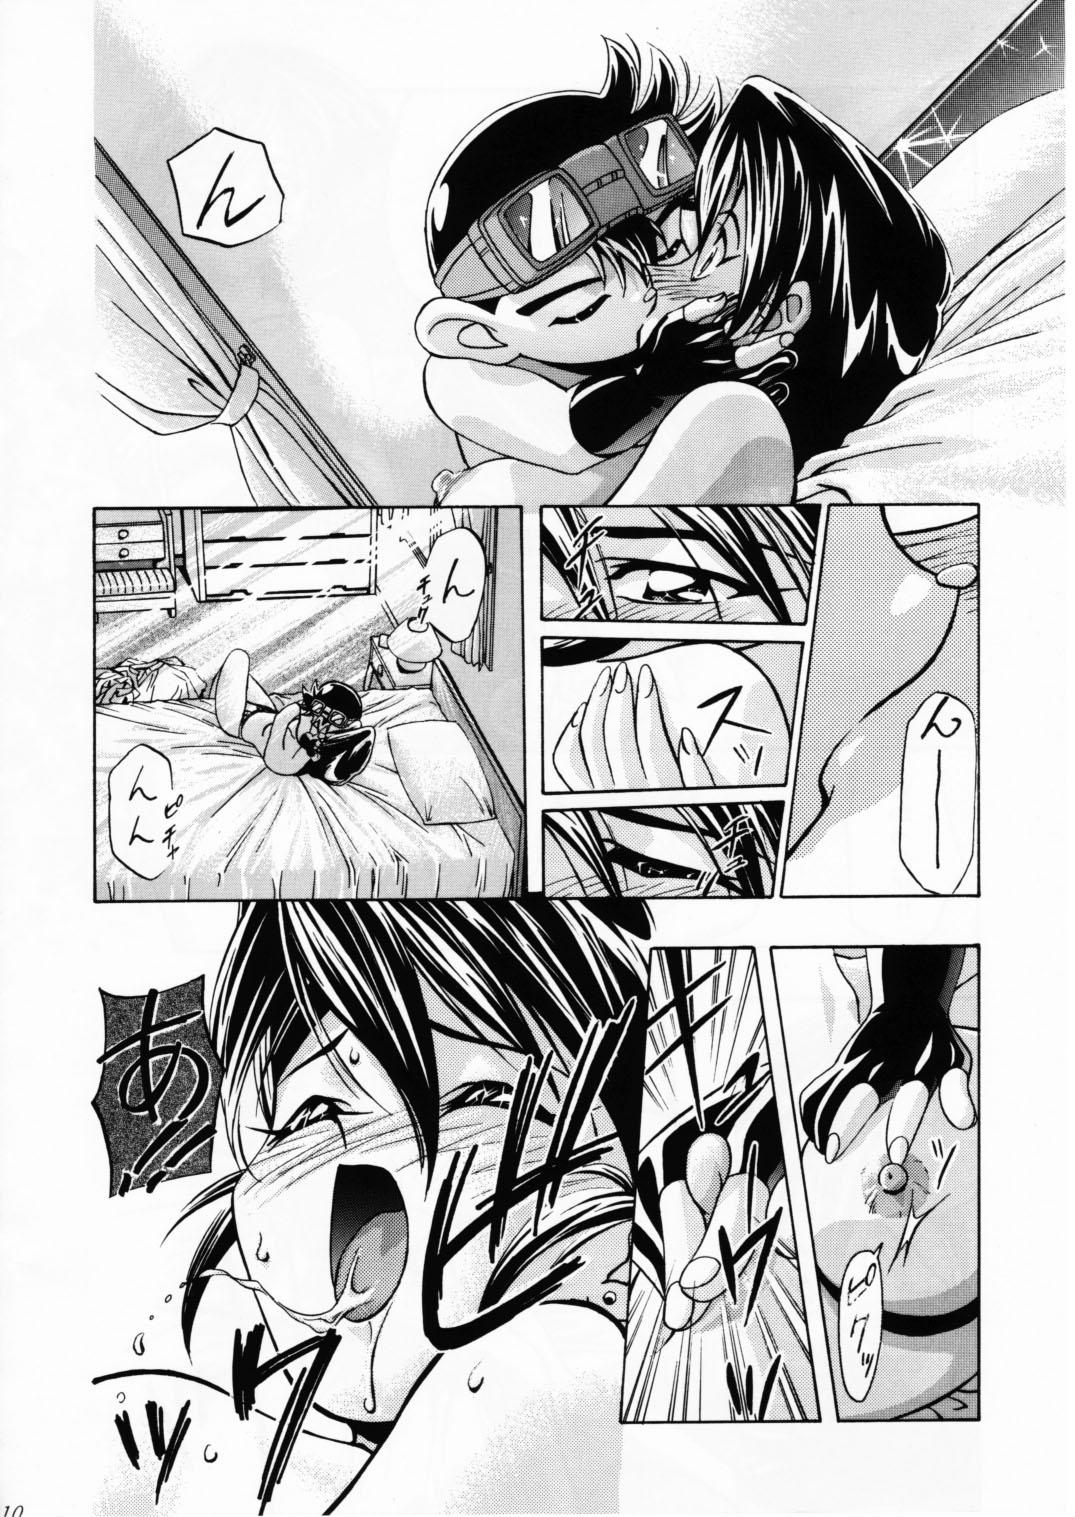 Matures Let's Ra Mix 2 LET'S GO - Bakusou kyoudai lets and go Pink - Page 9